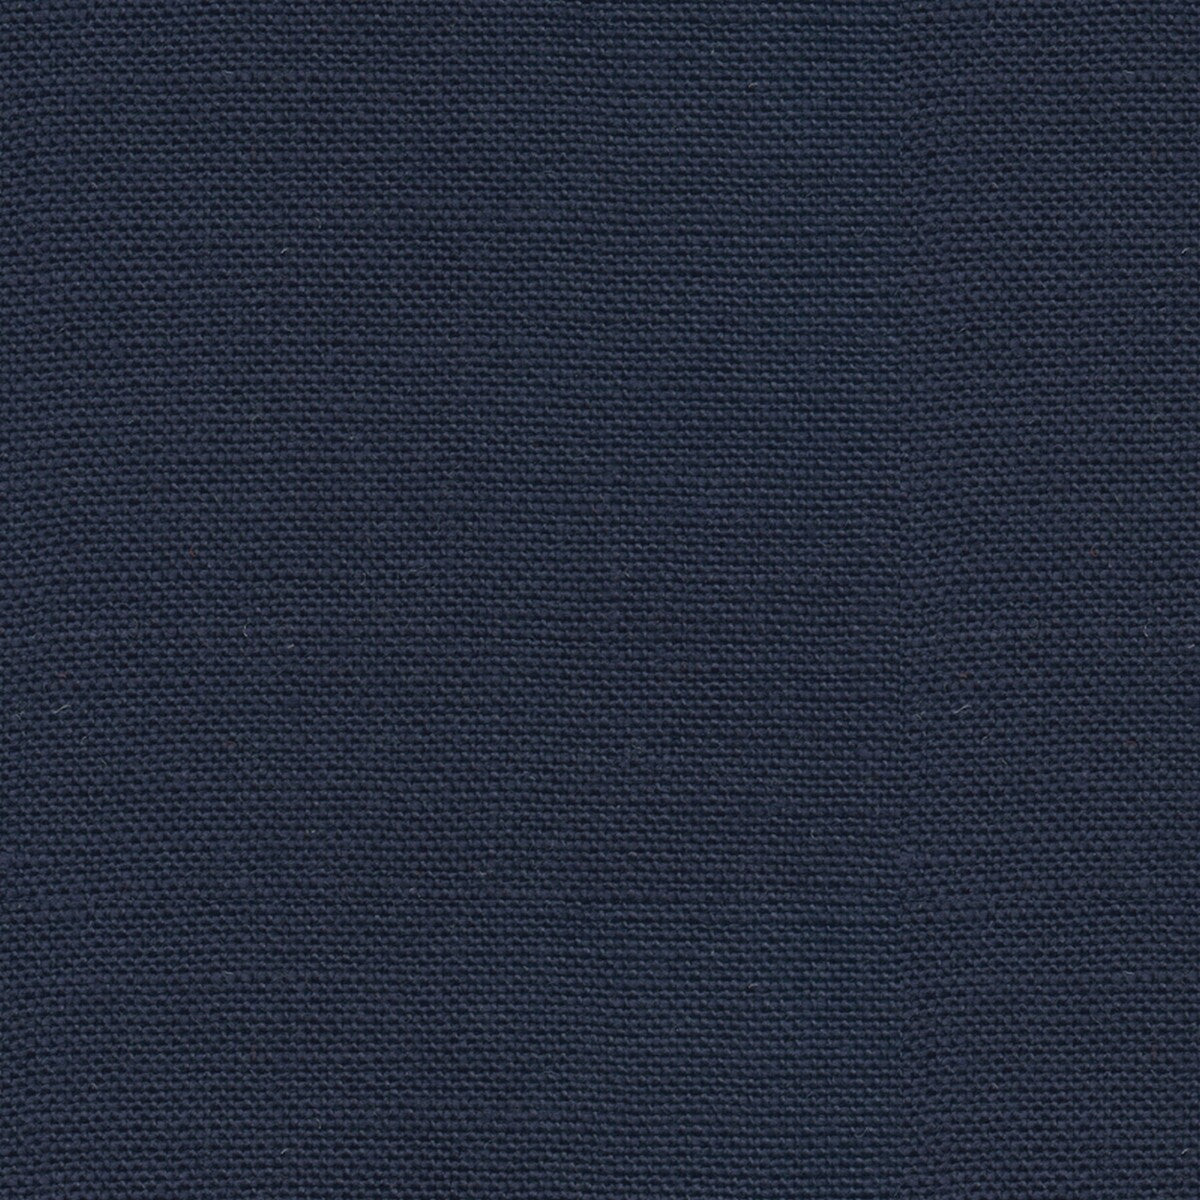 Lea fabric in indigo color - pattern J0337.680.0 - by G P &amp; J Baker in the Crayford collection